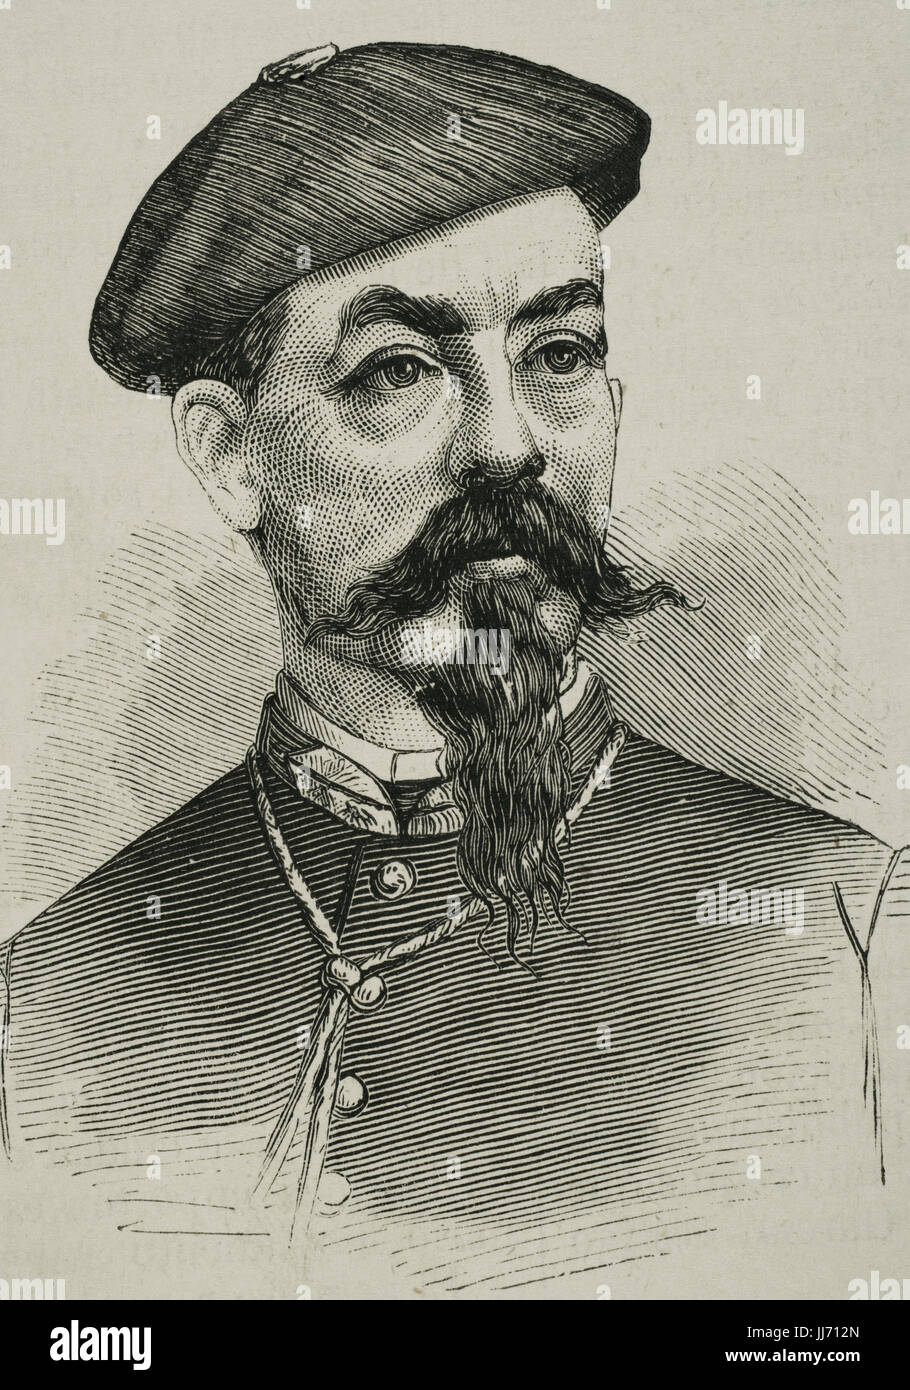 Angel Casimiro Villalain (d.1875). Commander of the Carlist troops during the Third Carlist War (Spain). The Spanish and American Illustration, 1875. Stock Photo